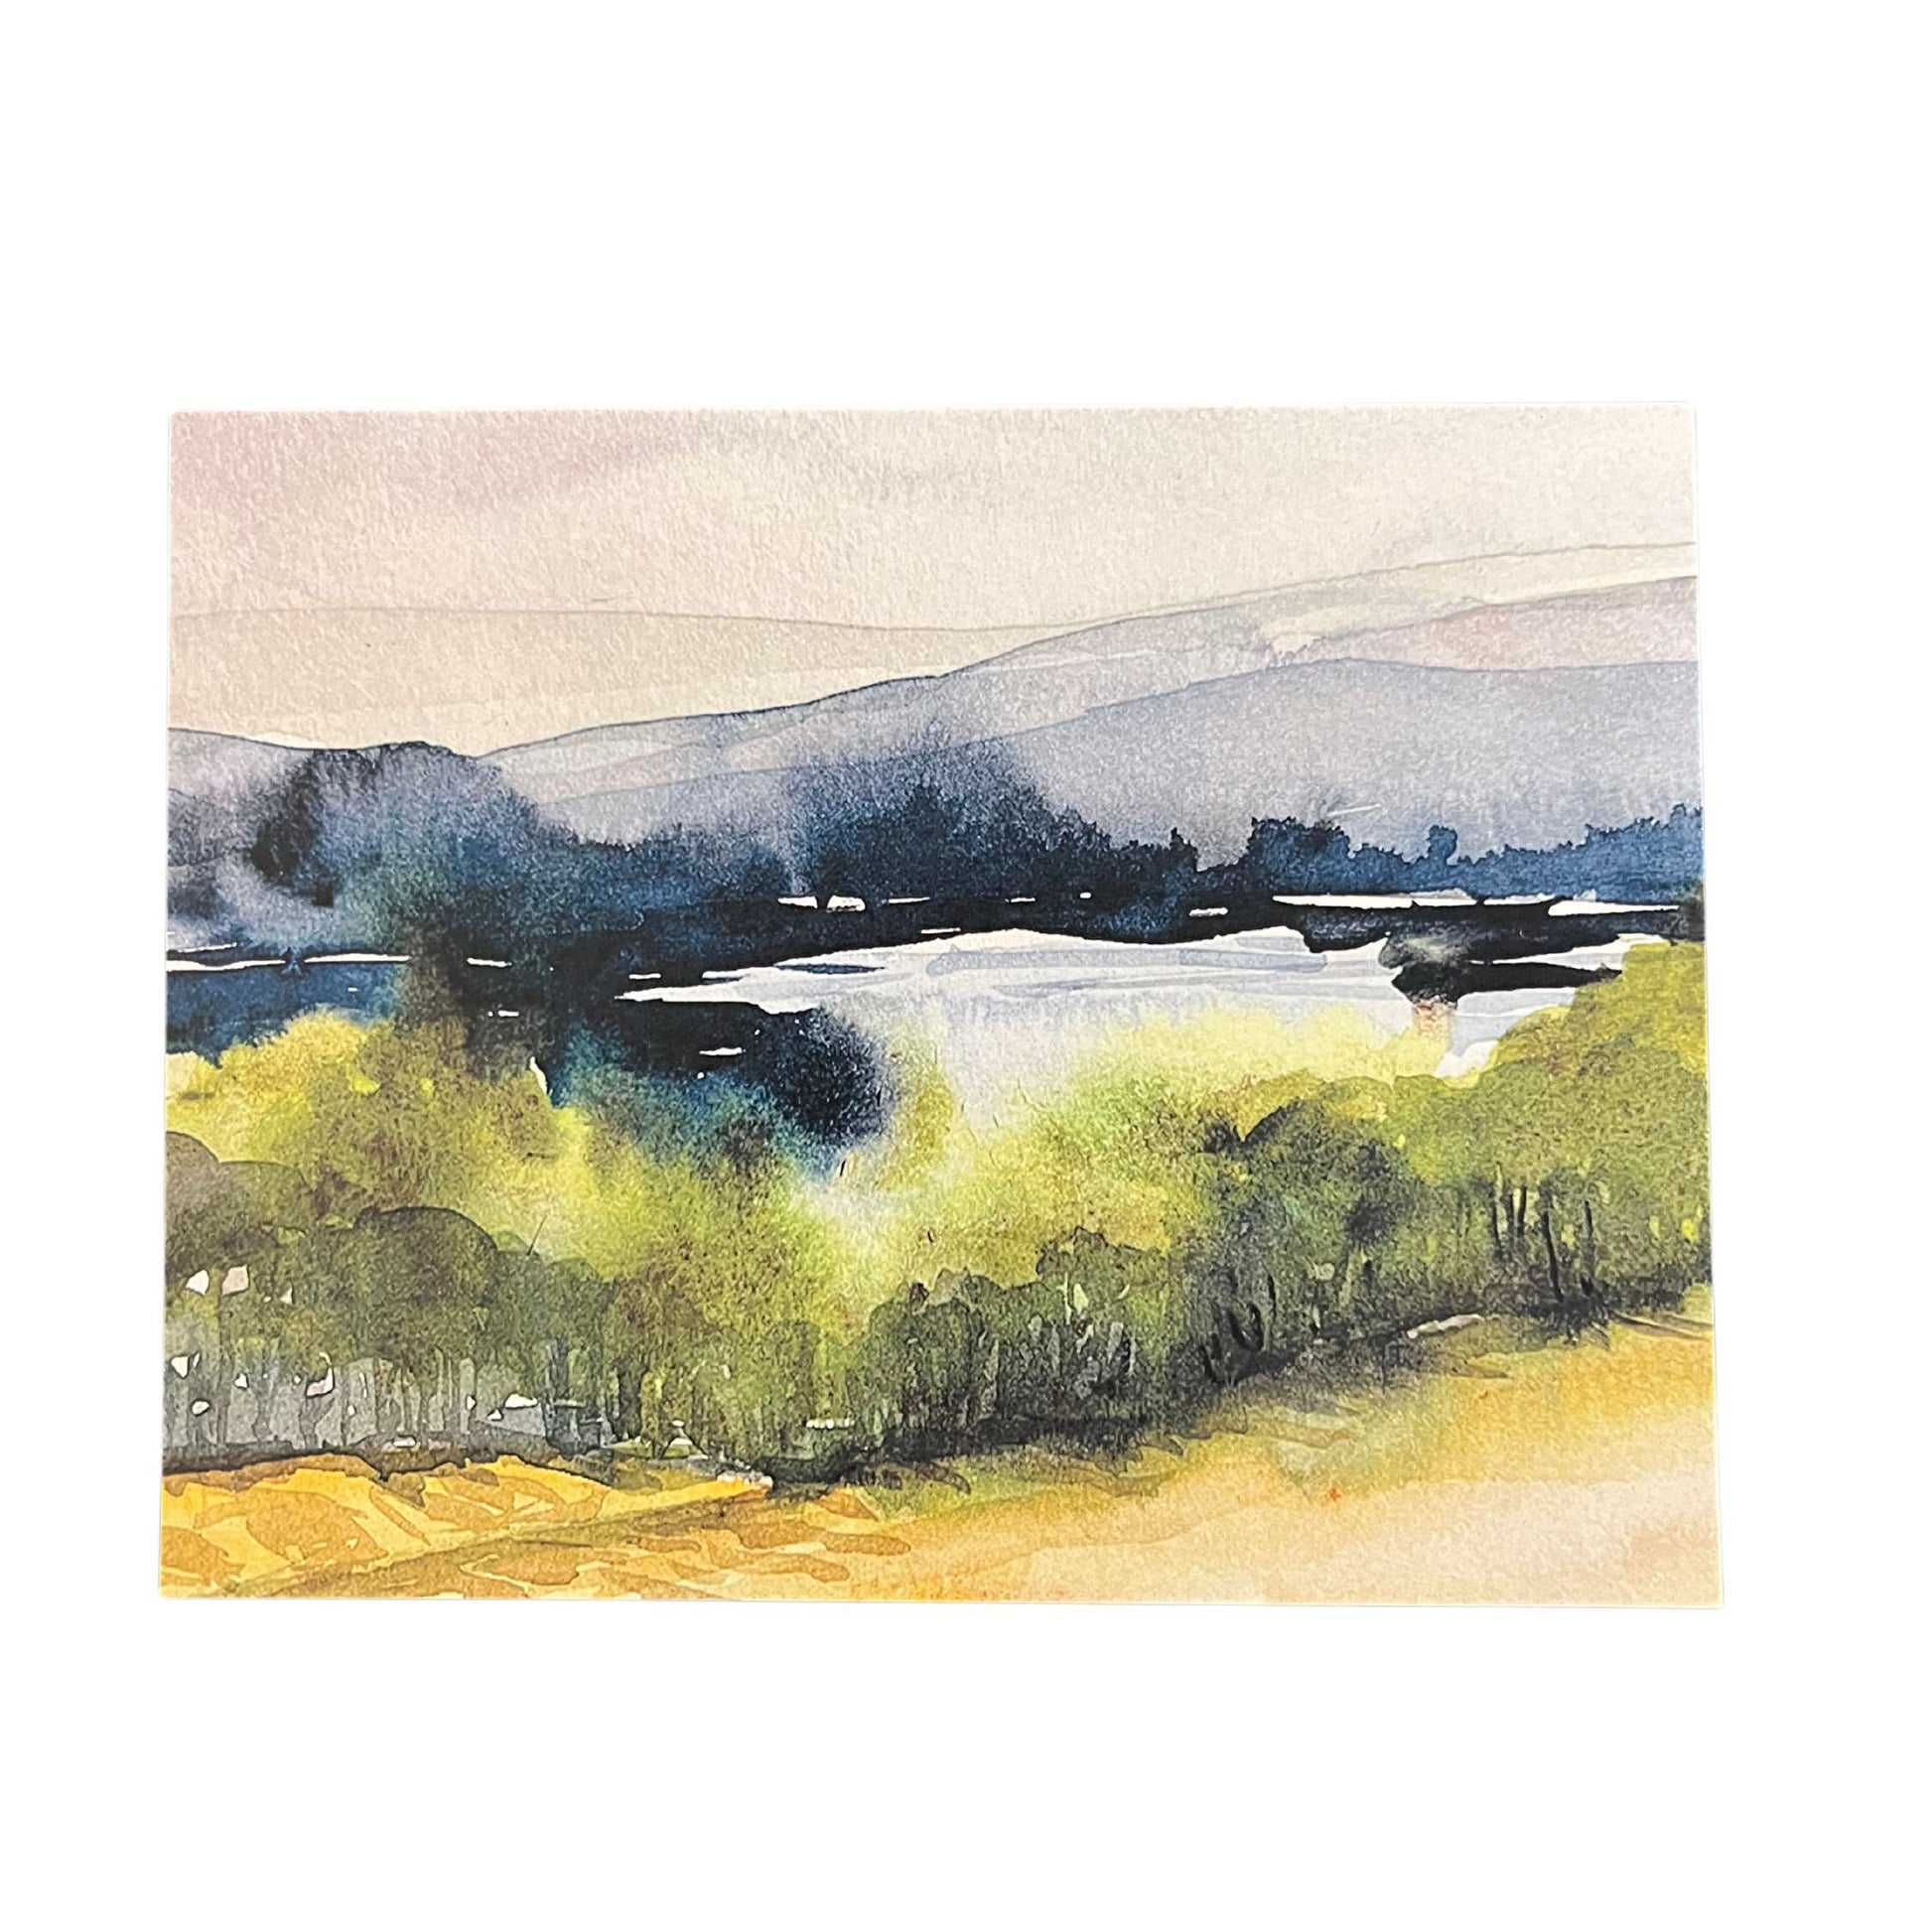 A blank greeting card depicting the Catskill mountains from Olana. This Hudson Valley artist, Laura Avello, creates this imagery by mixing watercolor and printmaking. Comes with a white envelope.